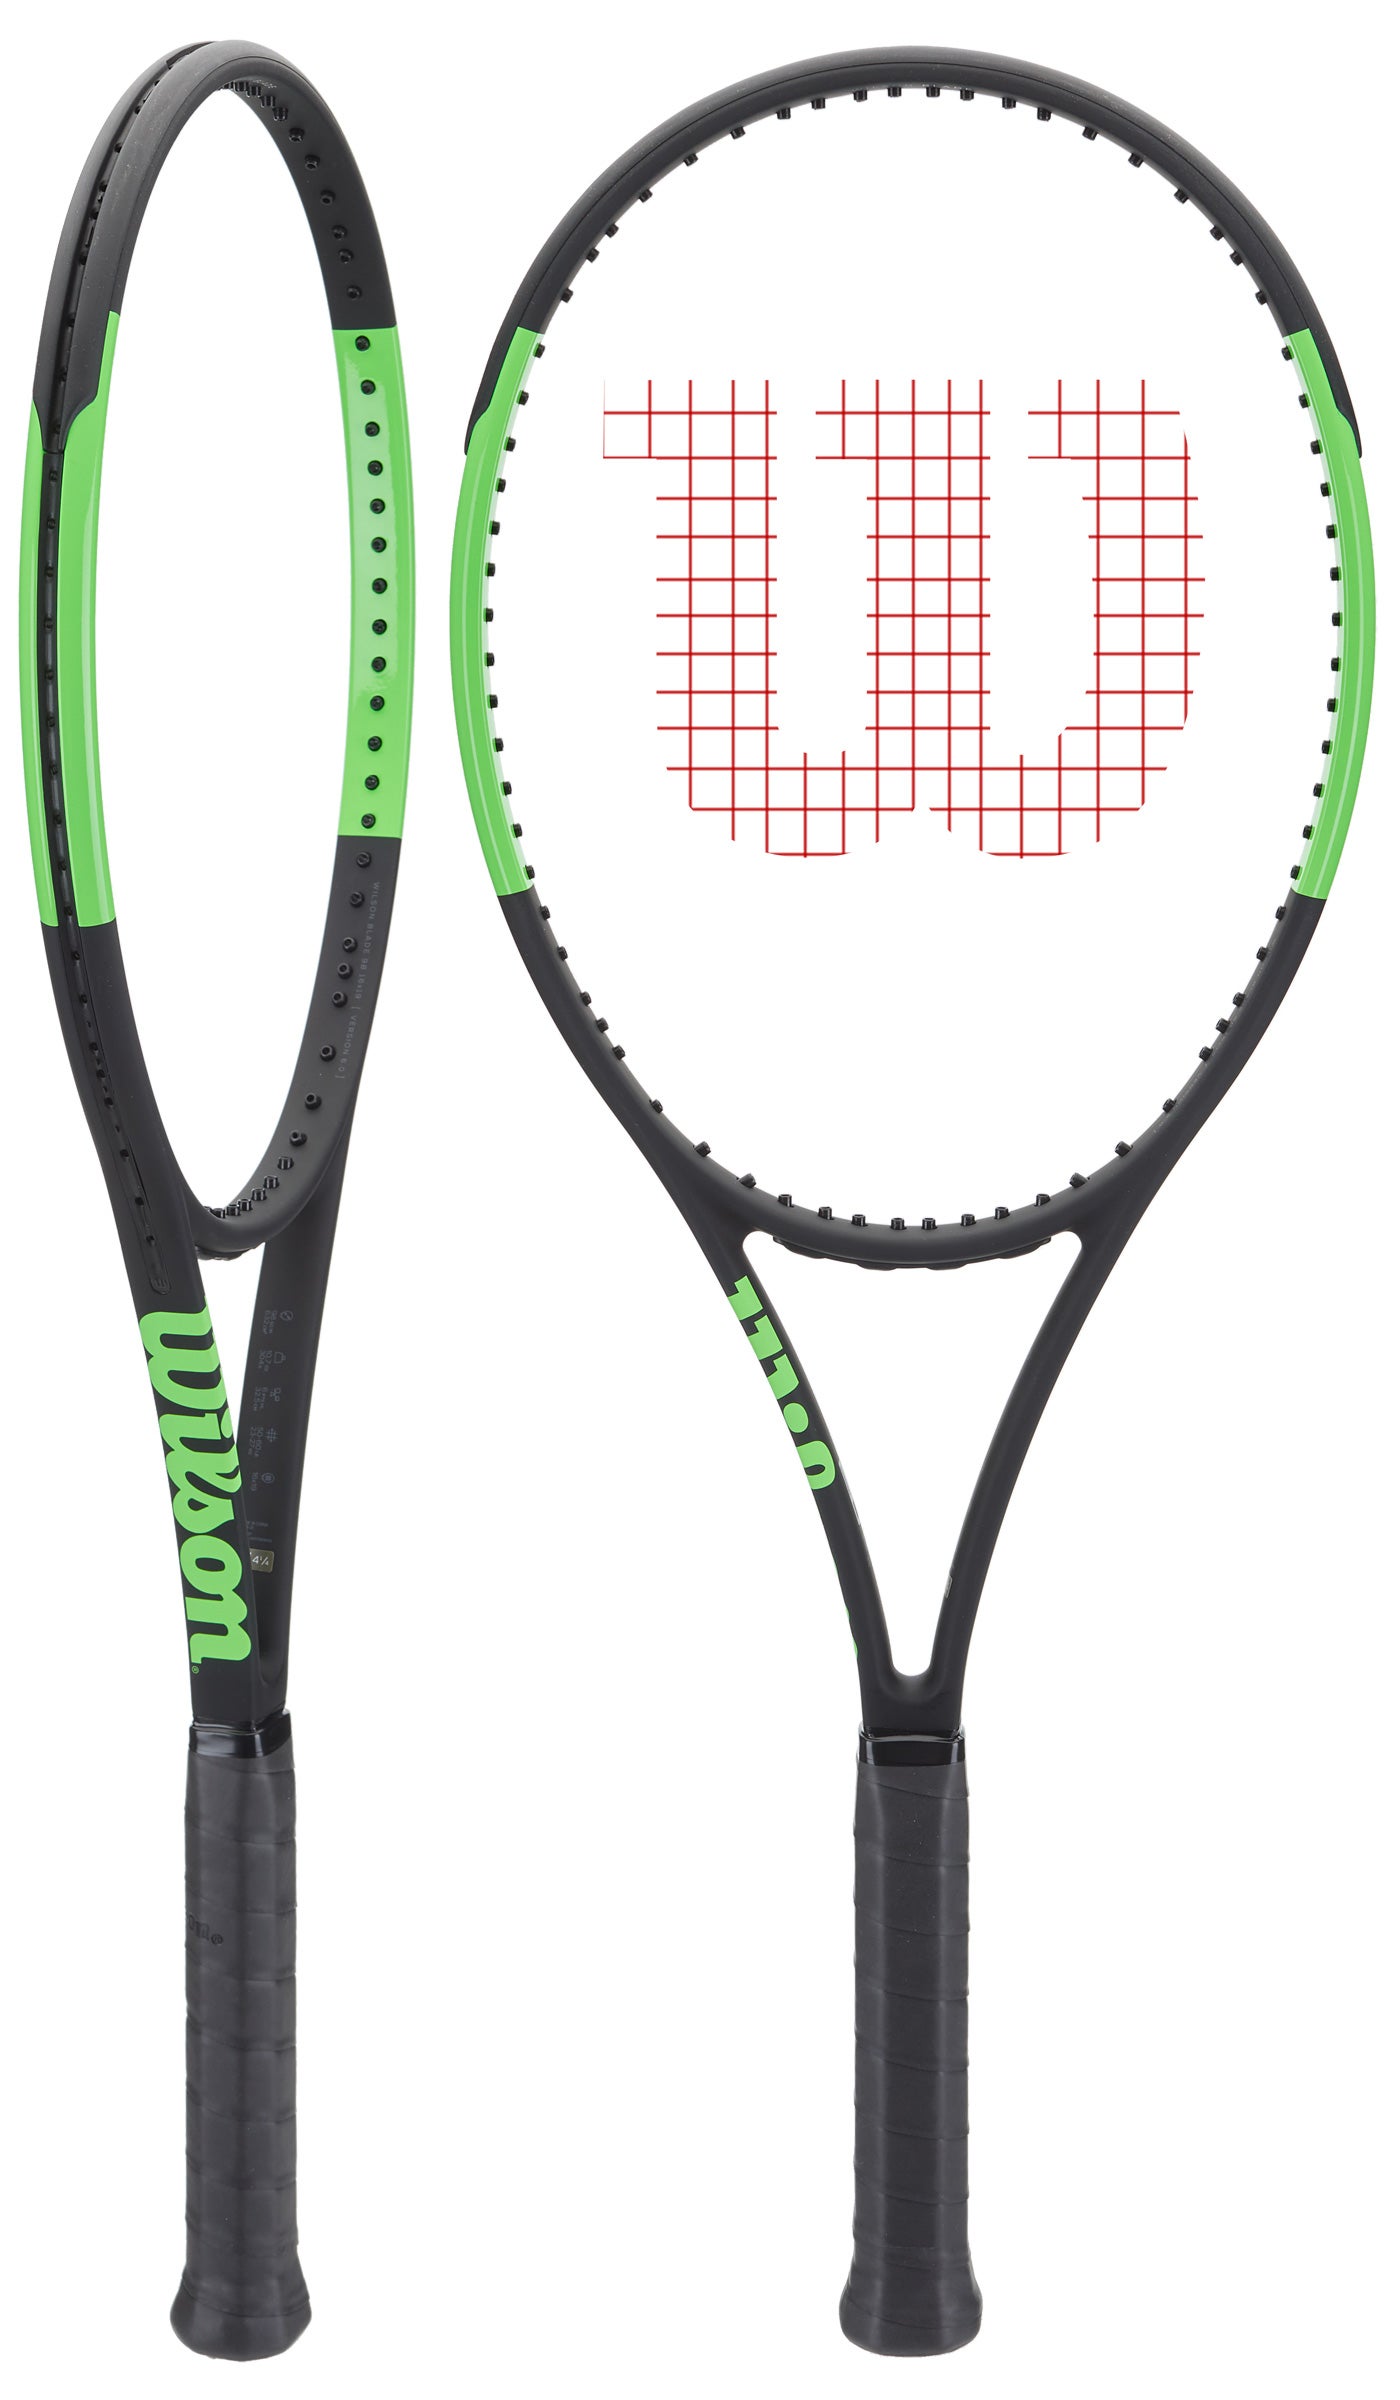 BOXING DAY DEAL NEW RACQUET Wilson Blade 98 16x19 v6.0 304g free stringing wit 